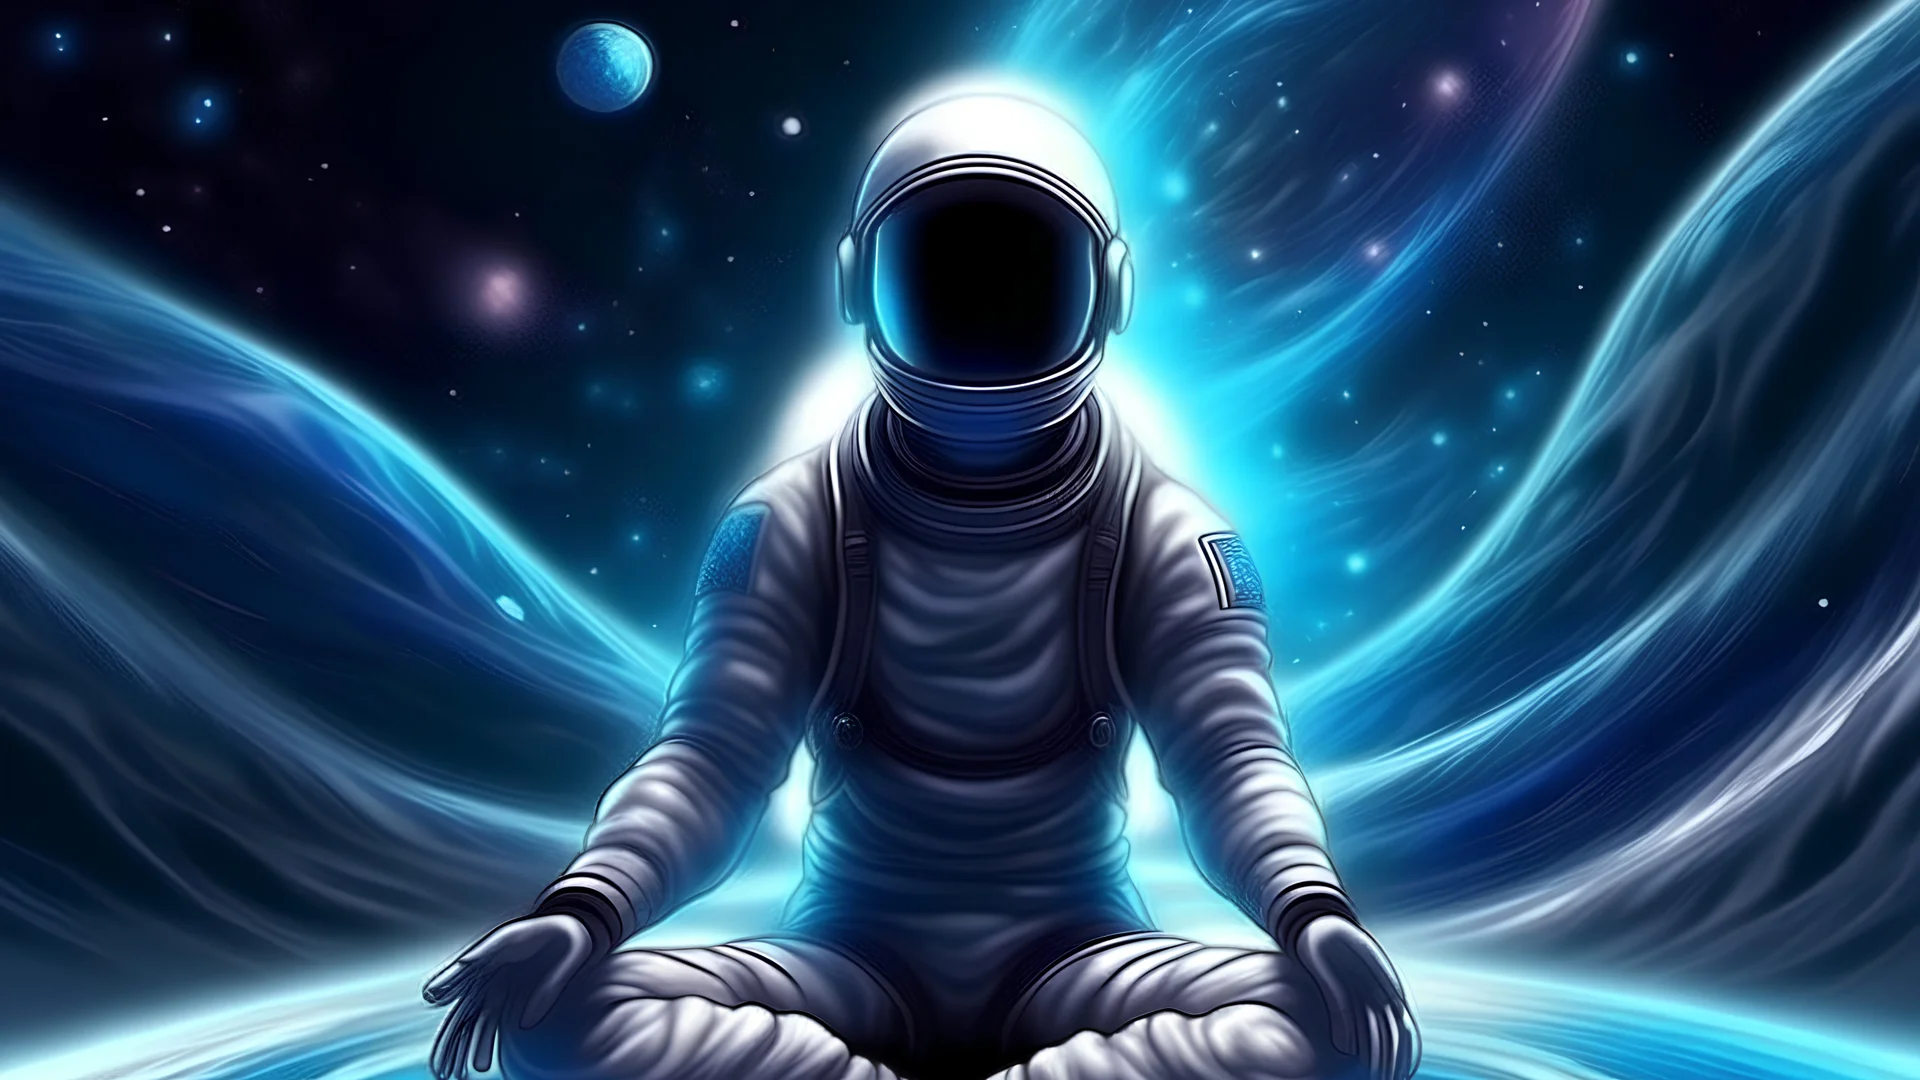 Meditation high energy realistic in space art style